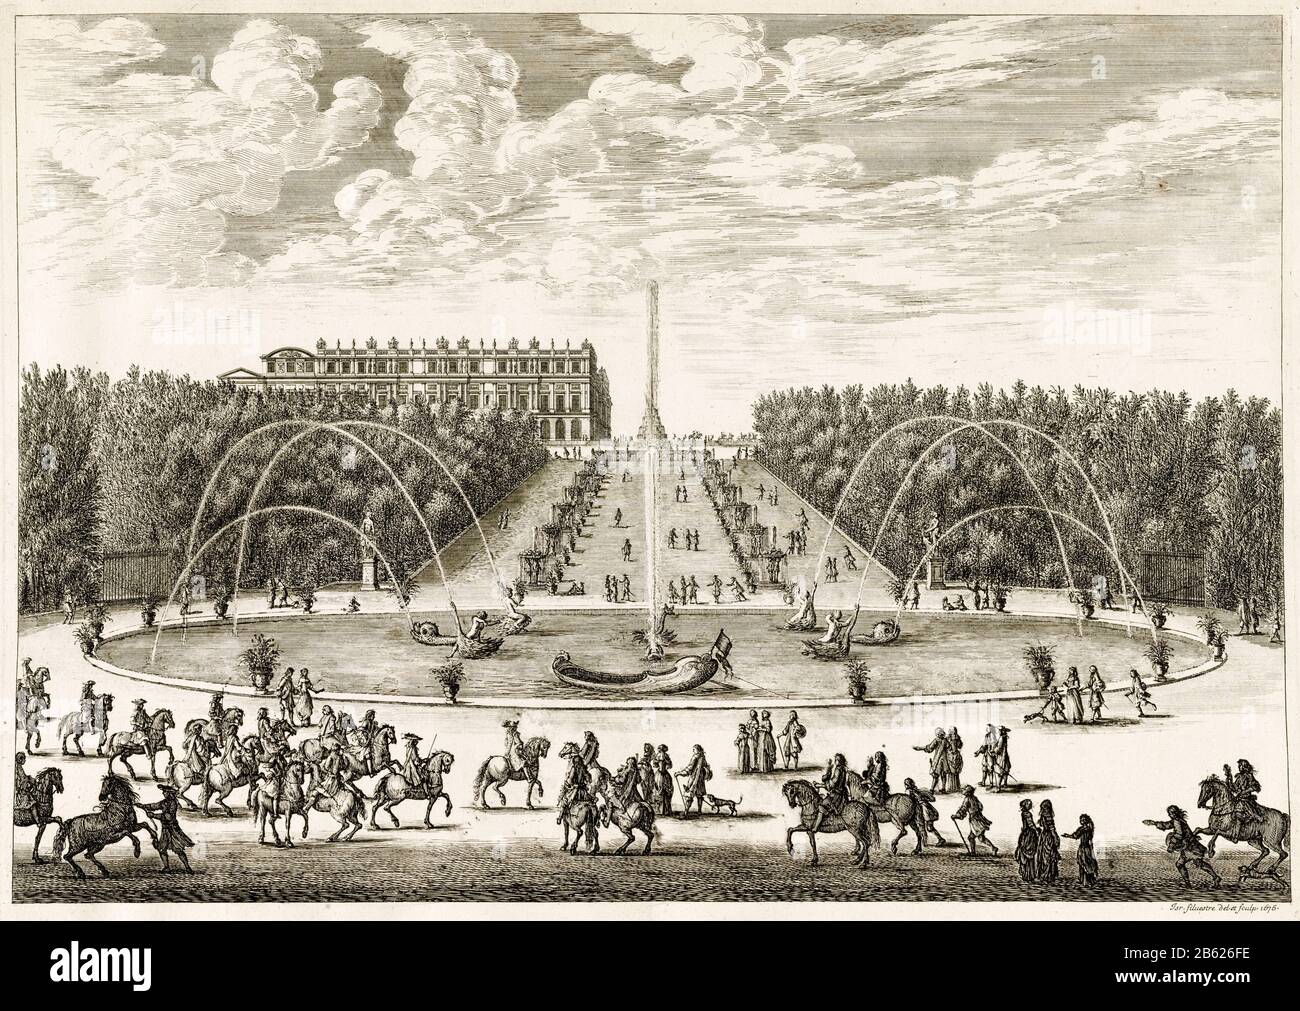 Fountain of the Dragon at the Palace of Versailles, France, engraving by Israele Silvestre, 1676 Stock Photo